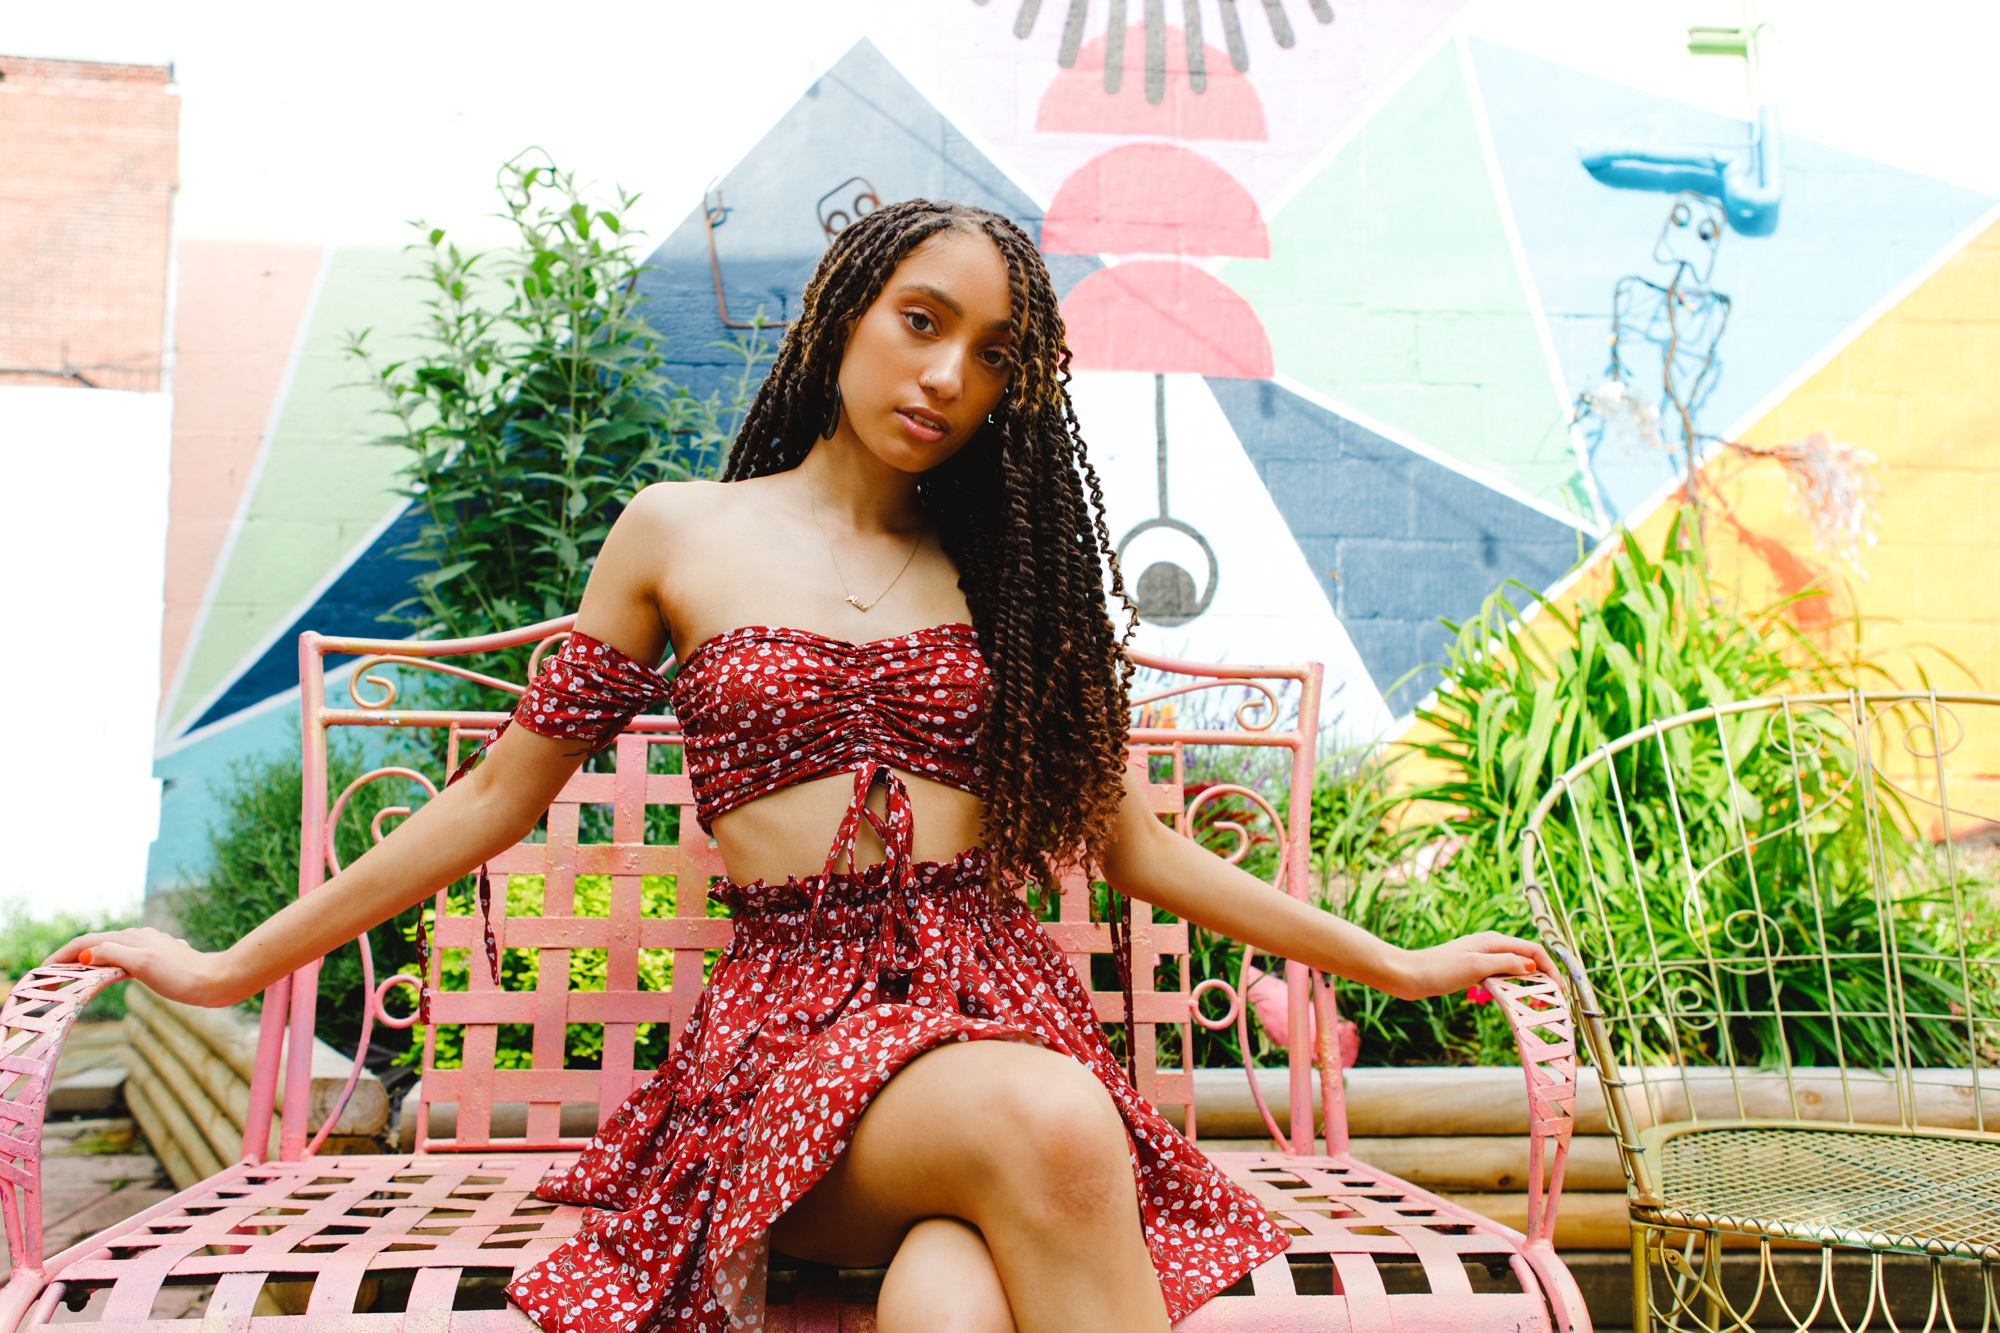 Alize sits in her two piece set on a pink bench in front of a mural